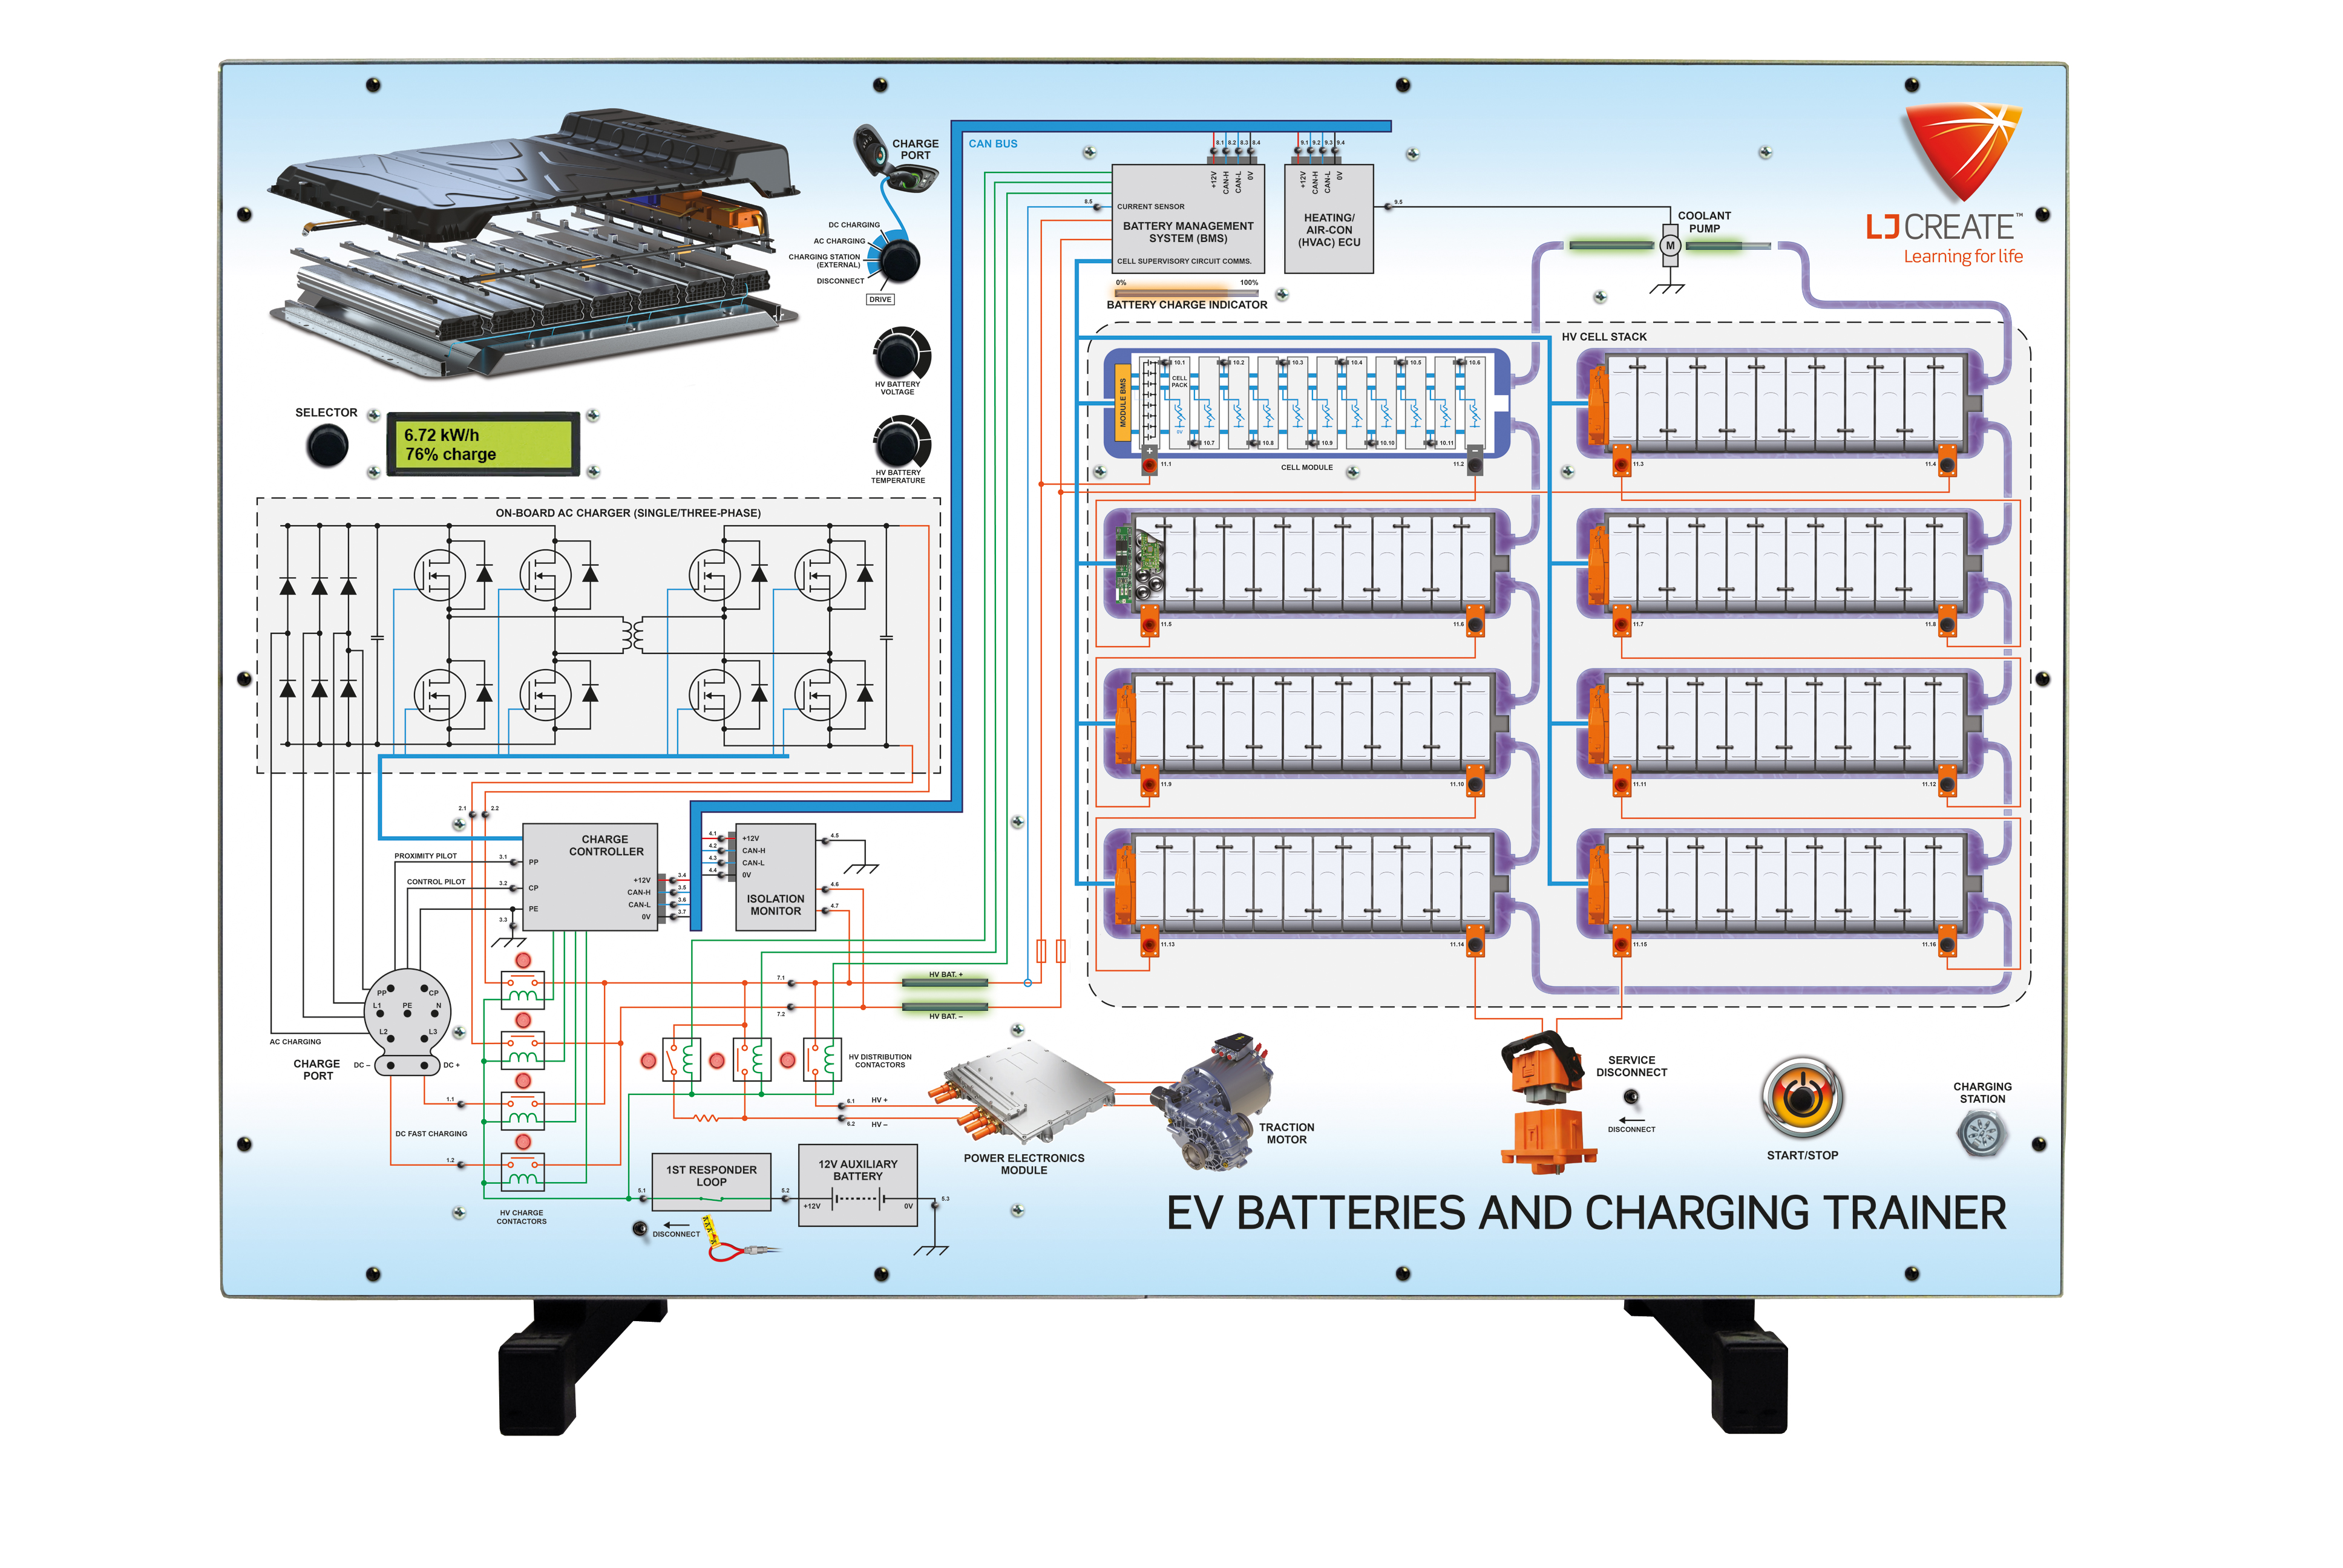 EV Batteries and Charging Panel Trainer